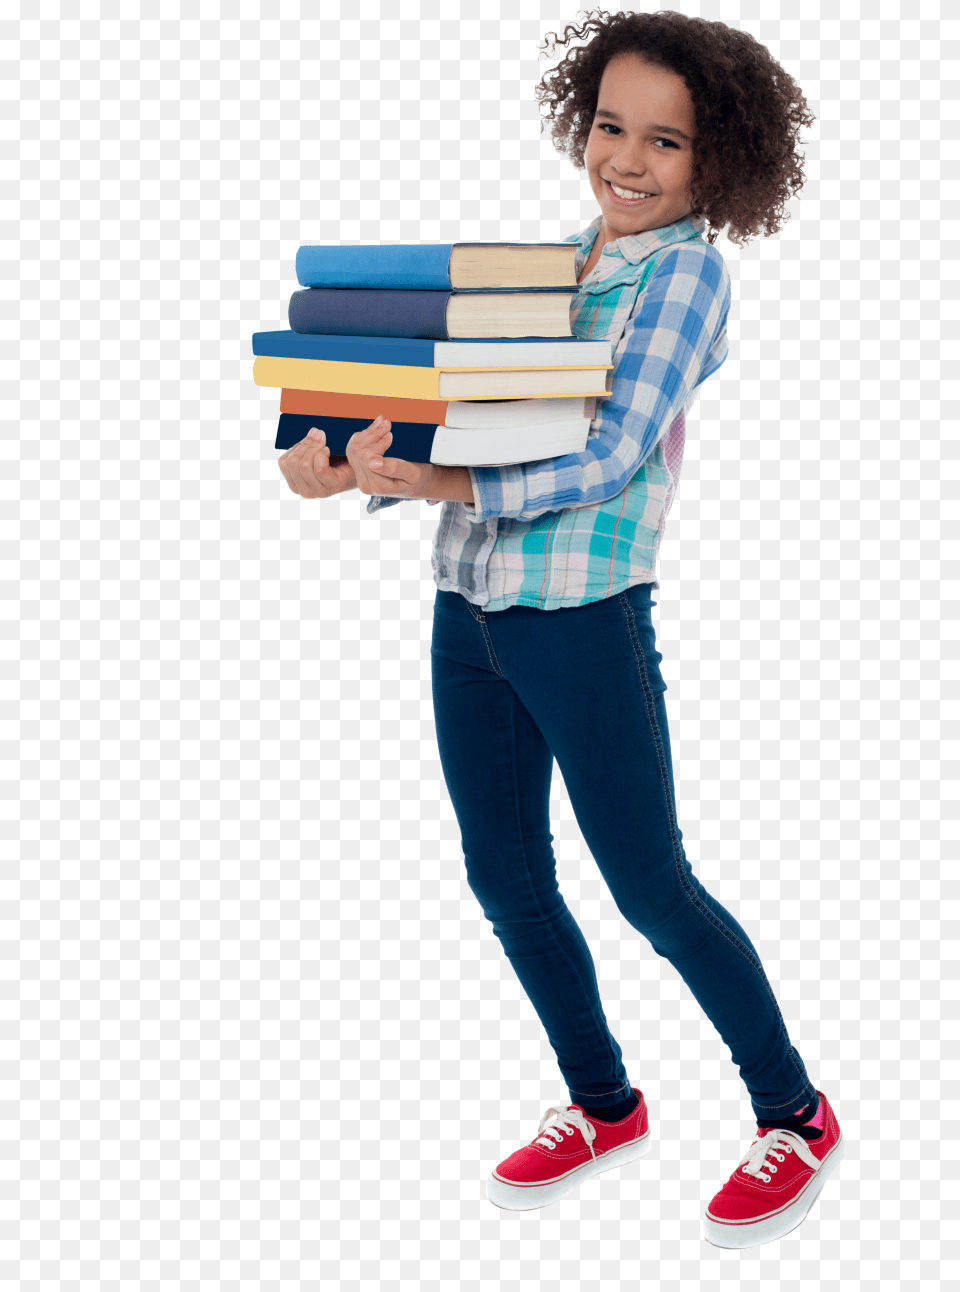 Young Girl Student Kid With School Books, Pants, Clothing, Shoe, Reading Png Image